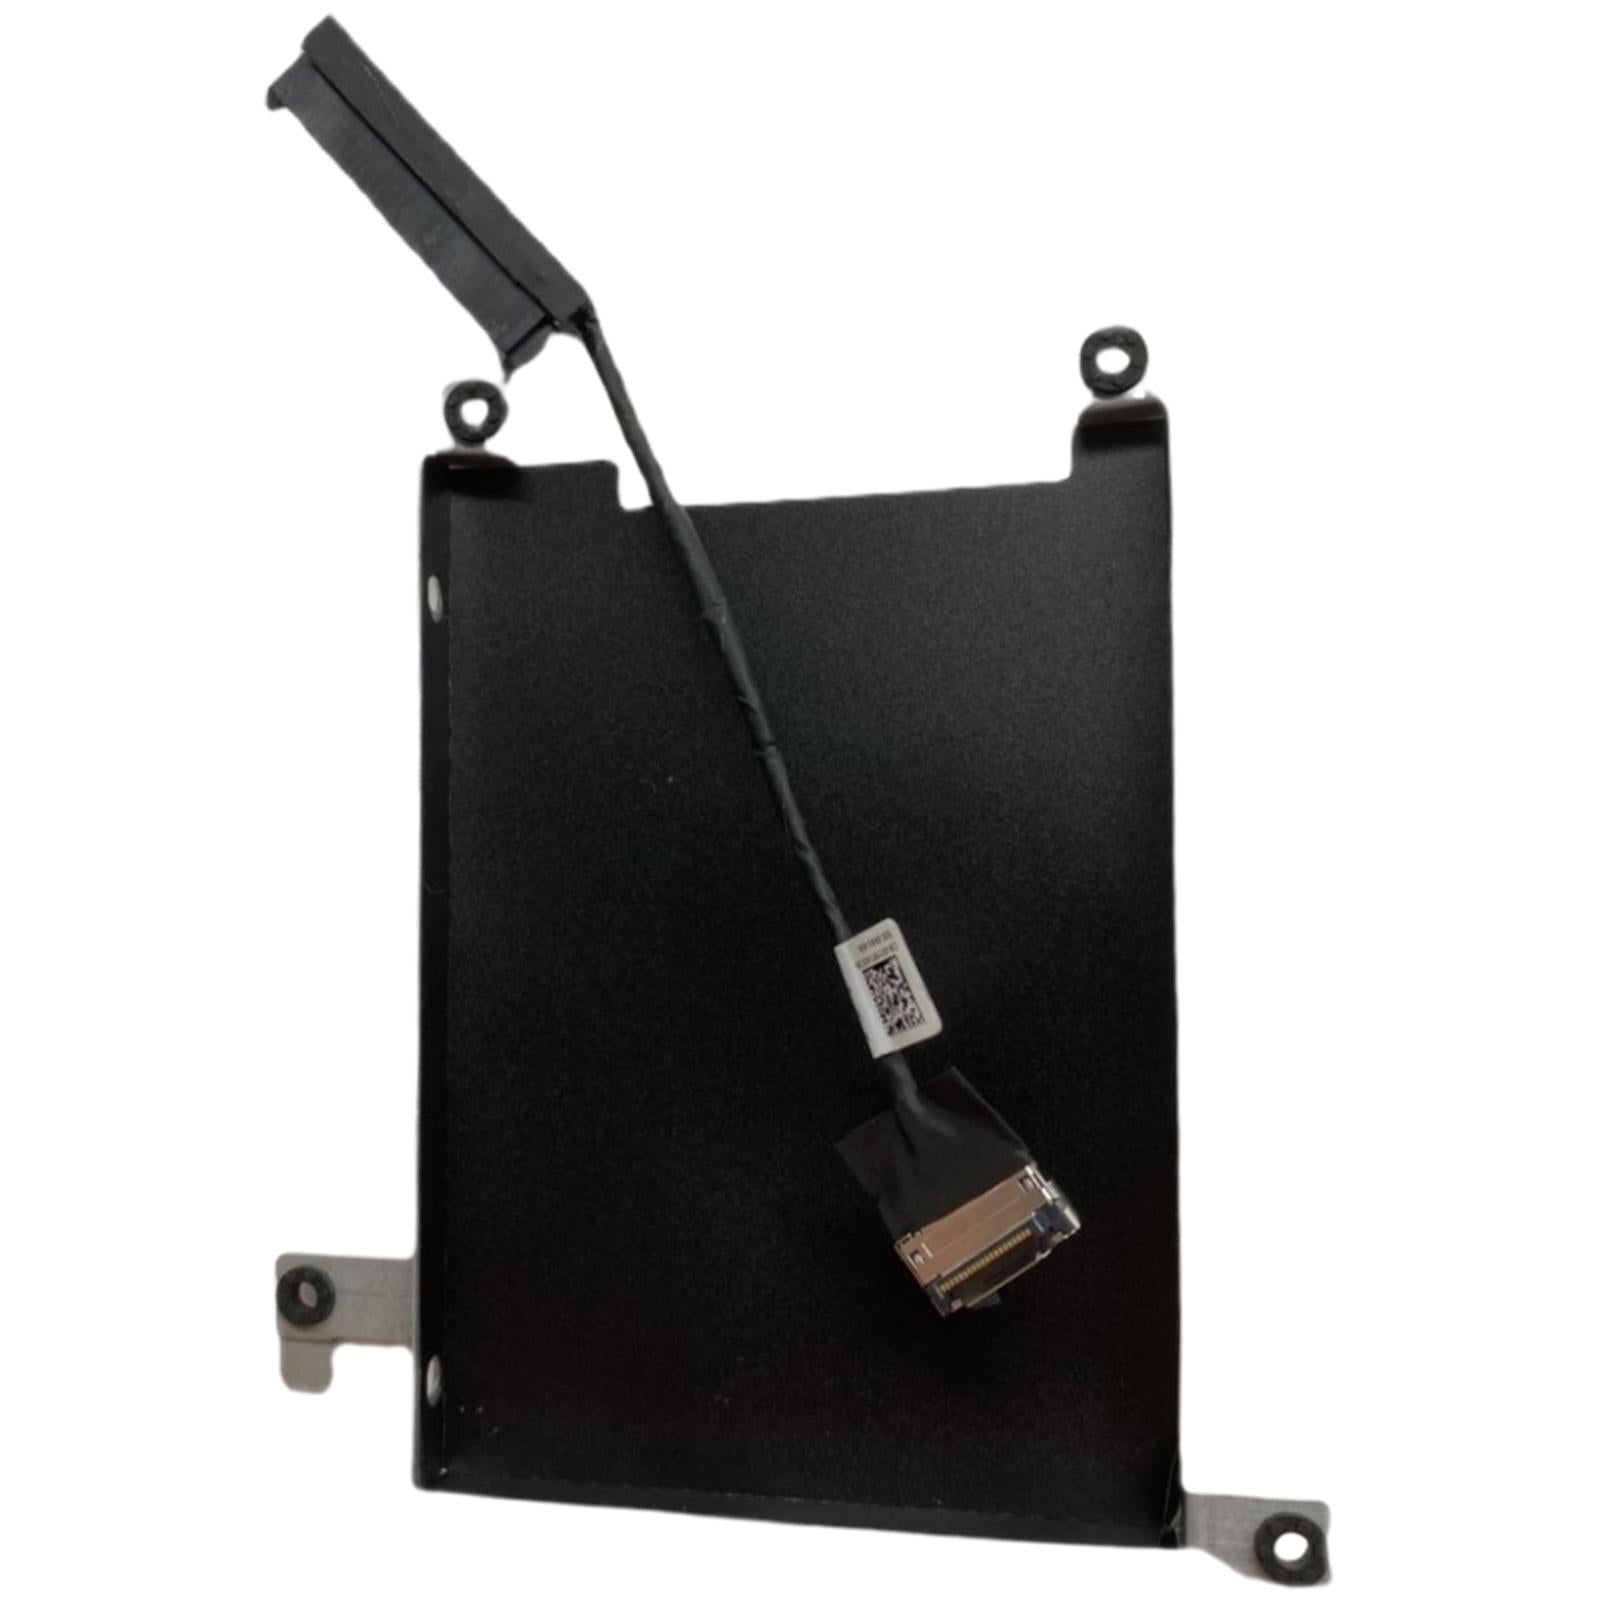 0ND8N9 ND8N9 Replacement Hard Drive Bracket for Dell Latitude 5502 5505